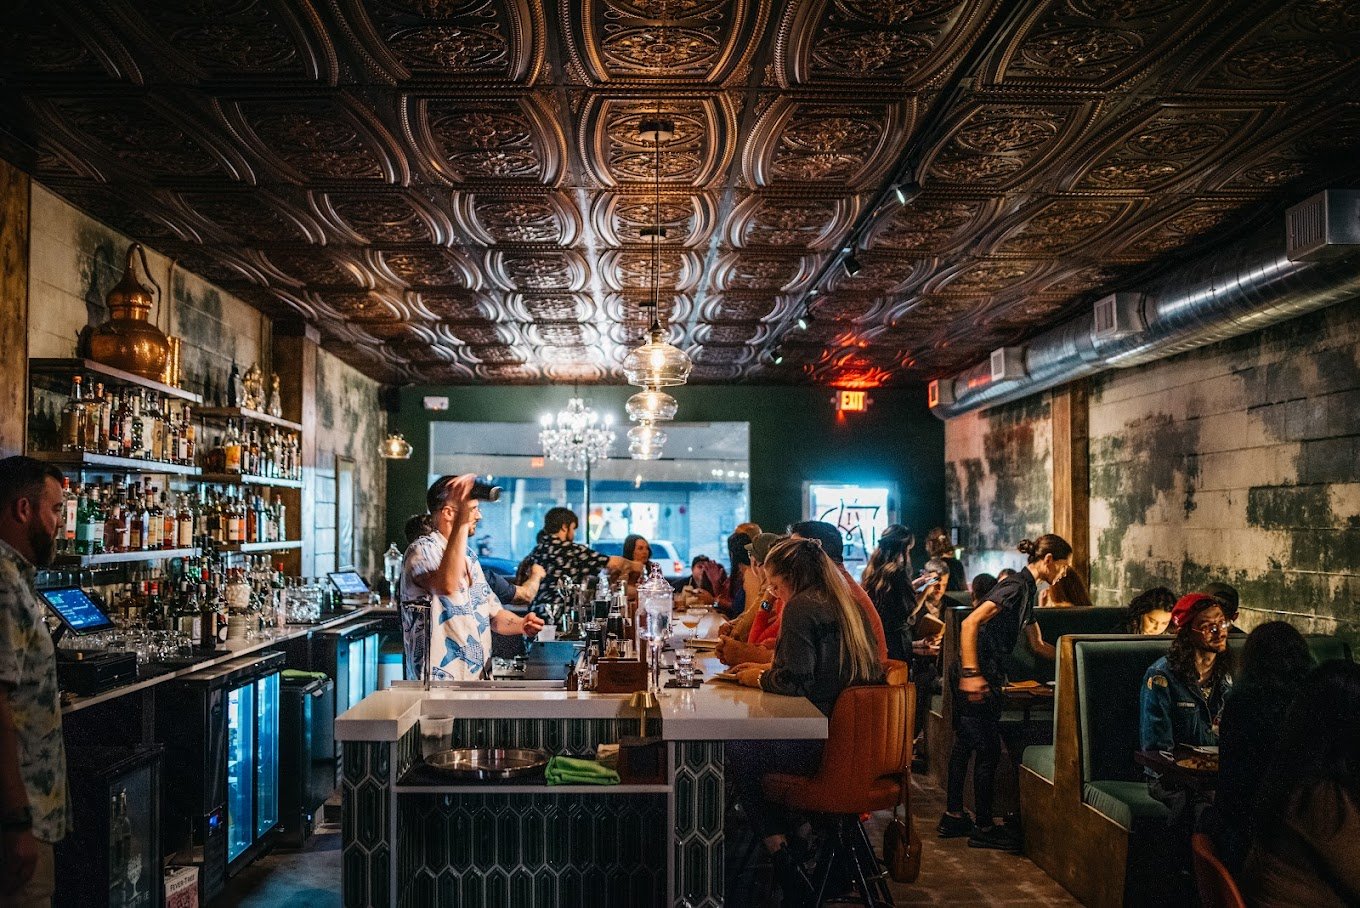 inside the bar with ornamental ceiling and alcohol